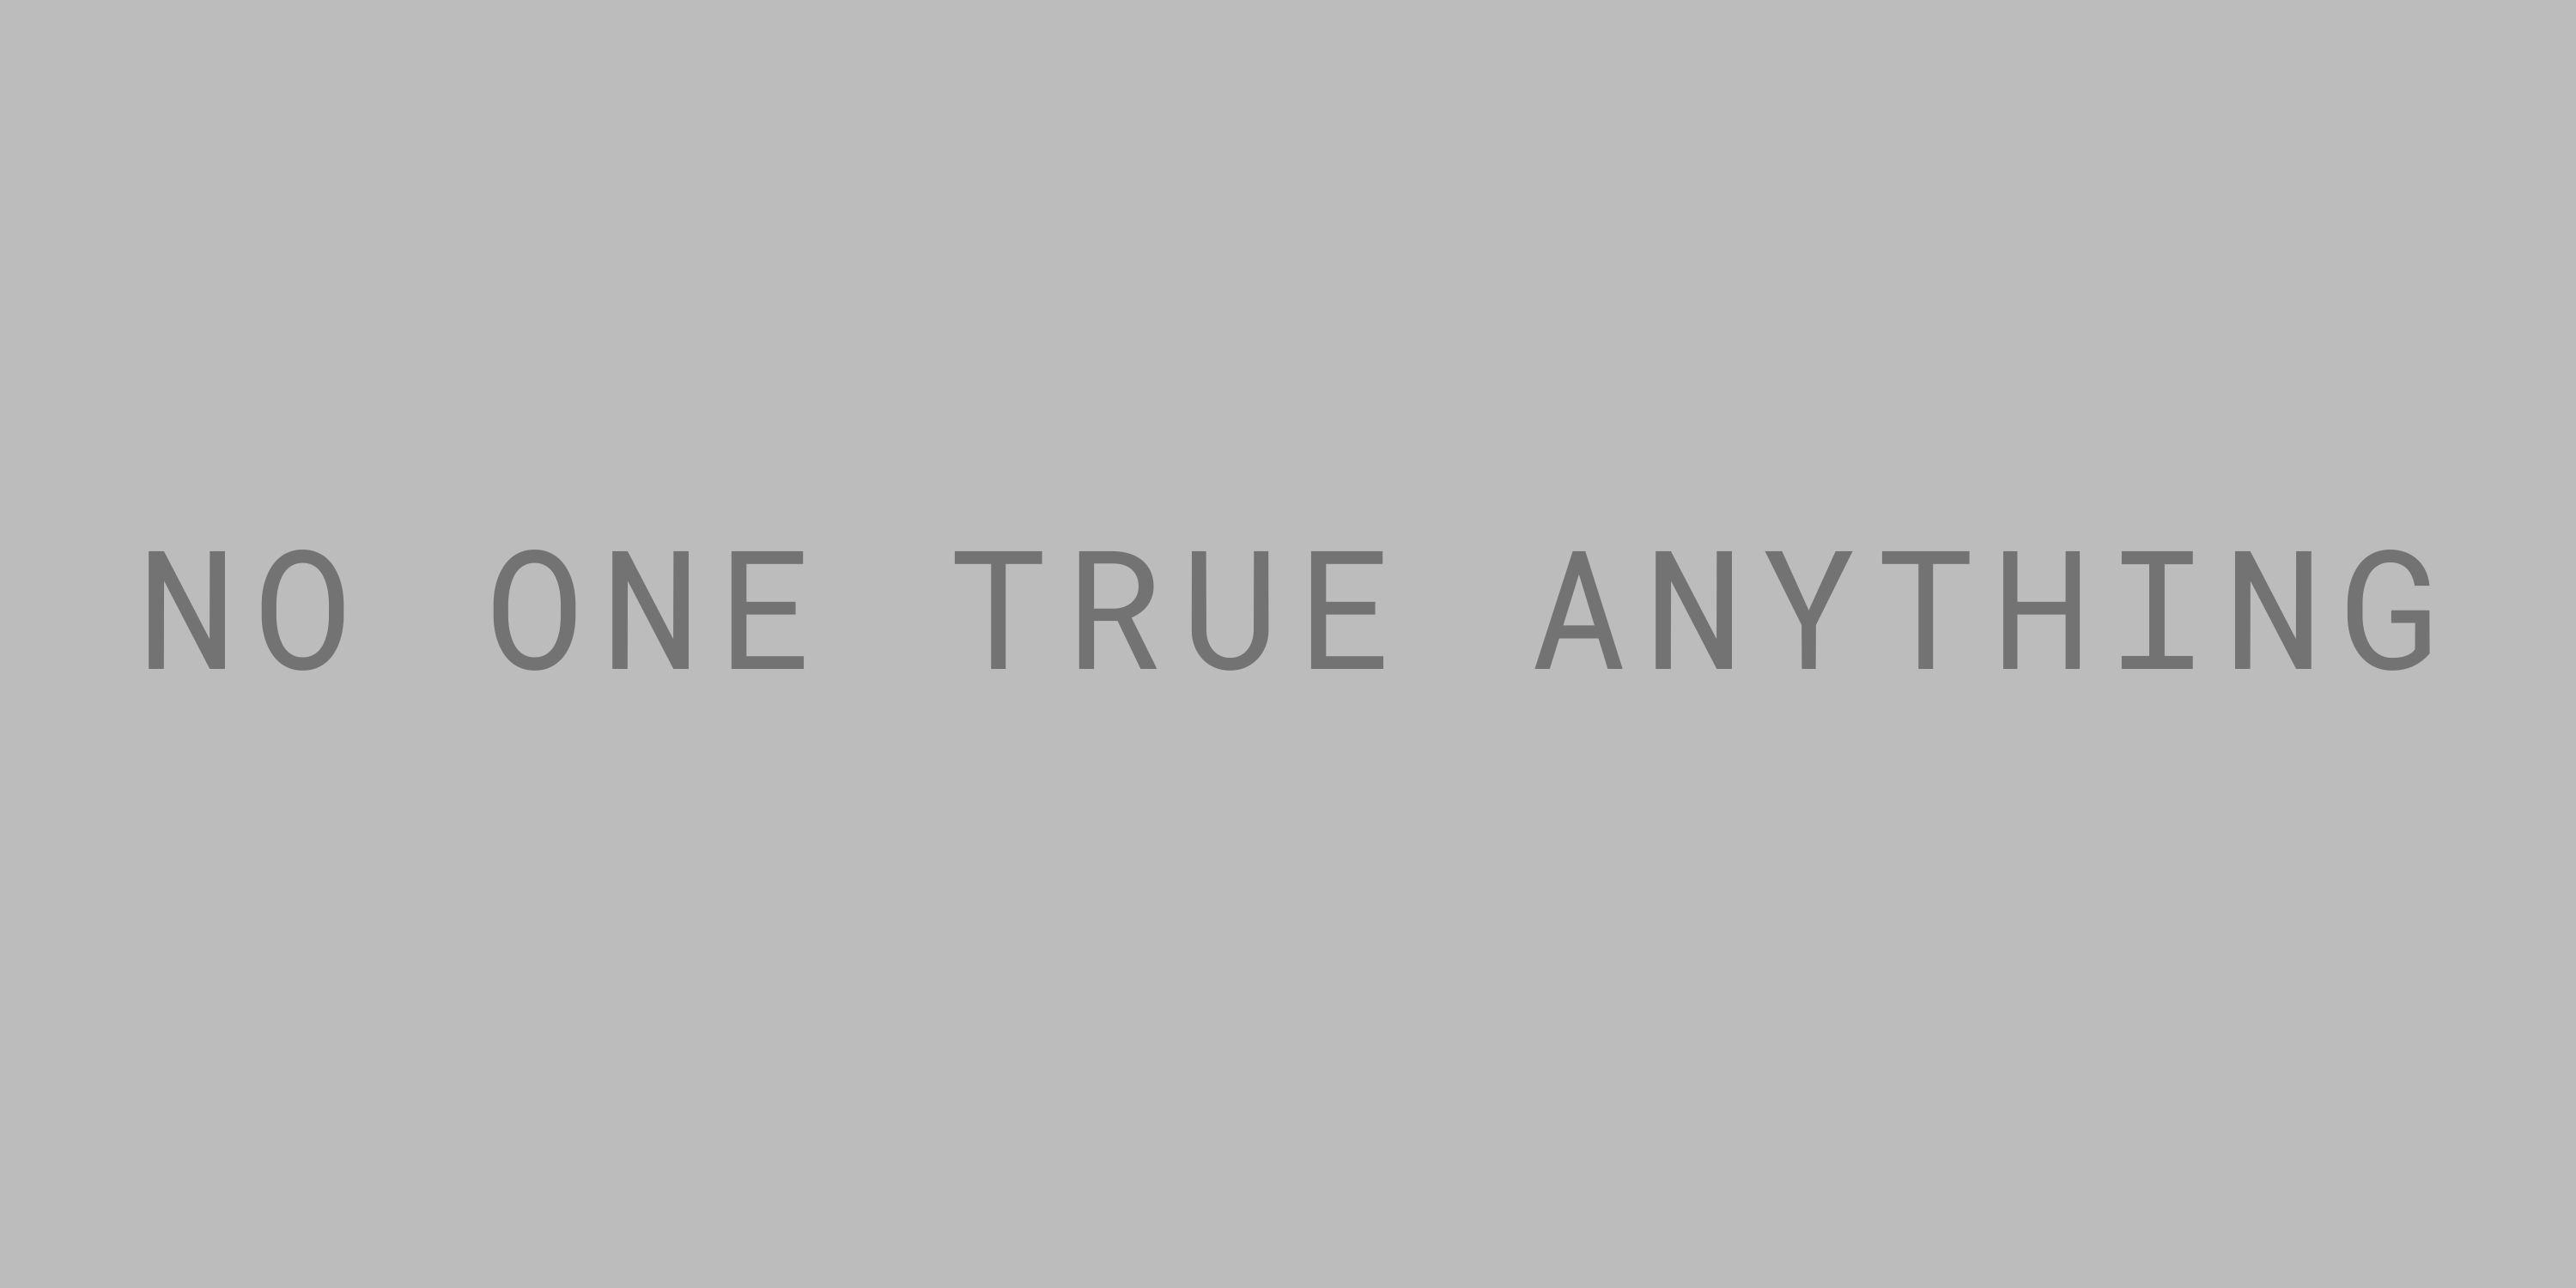 NO ONE TRUE ANYTHING